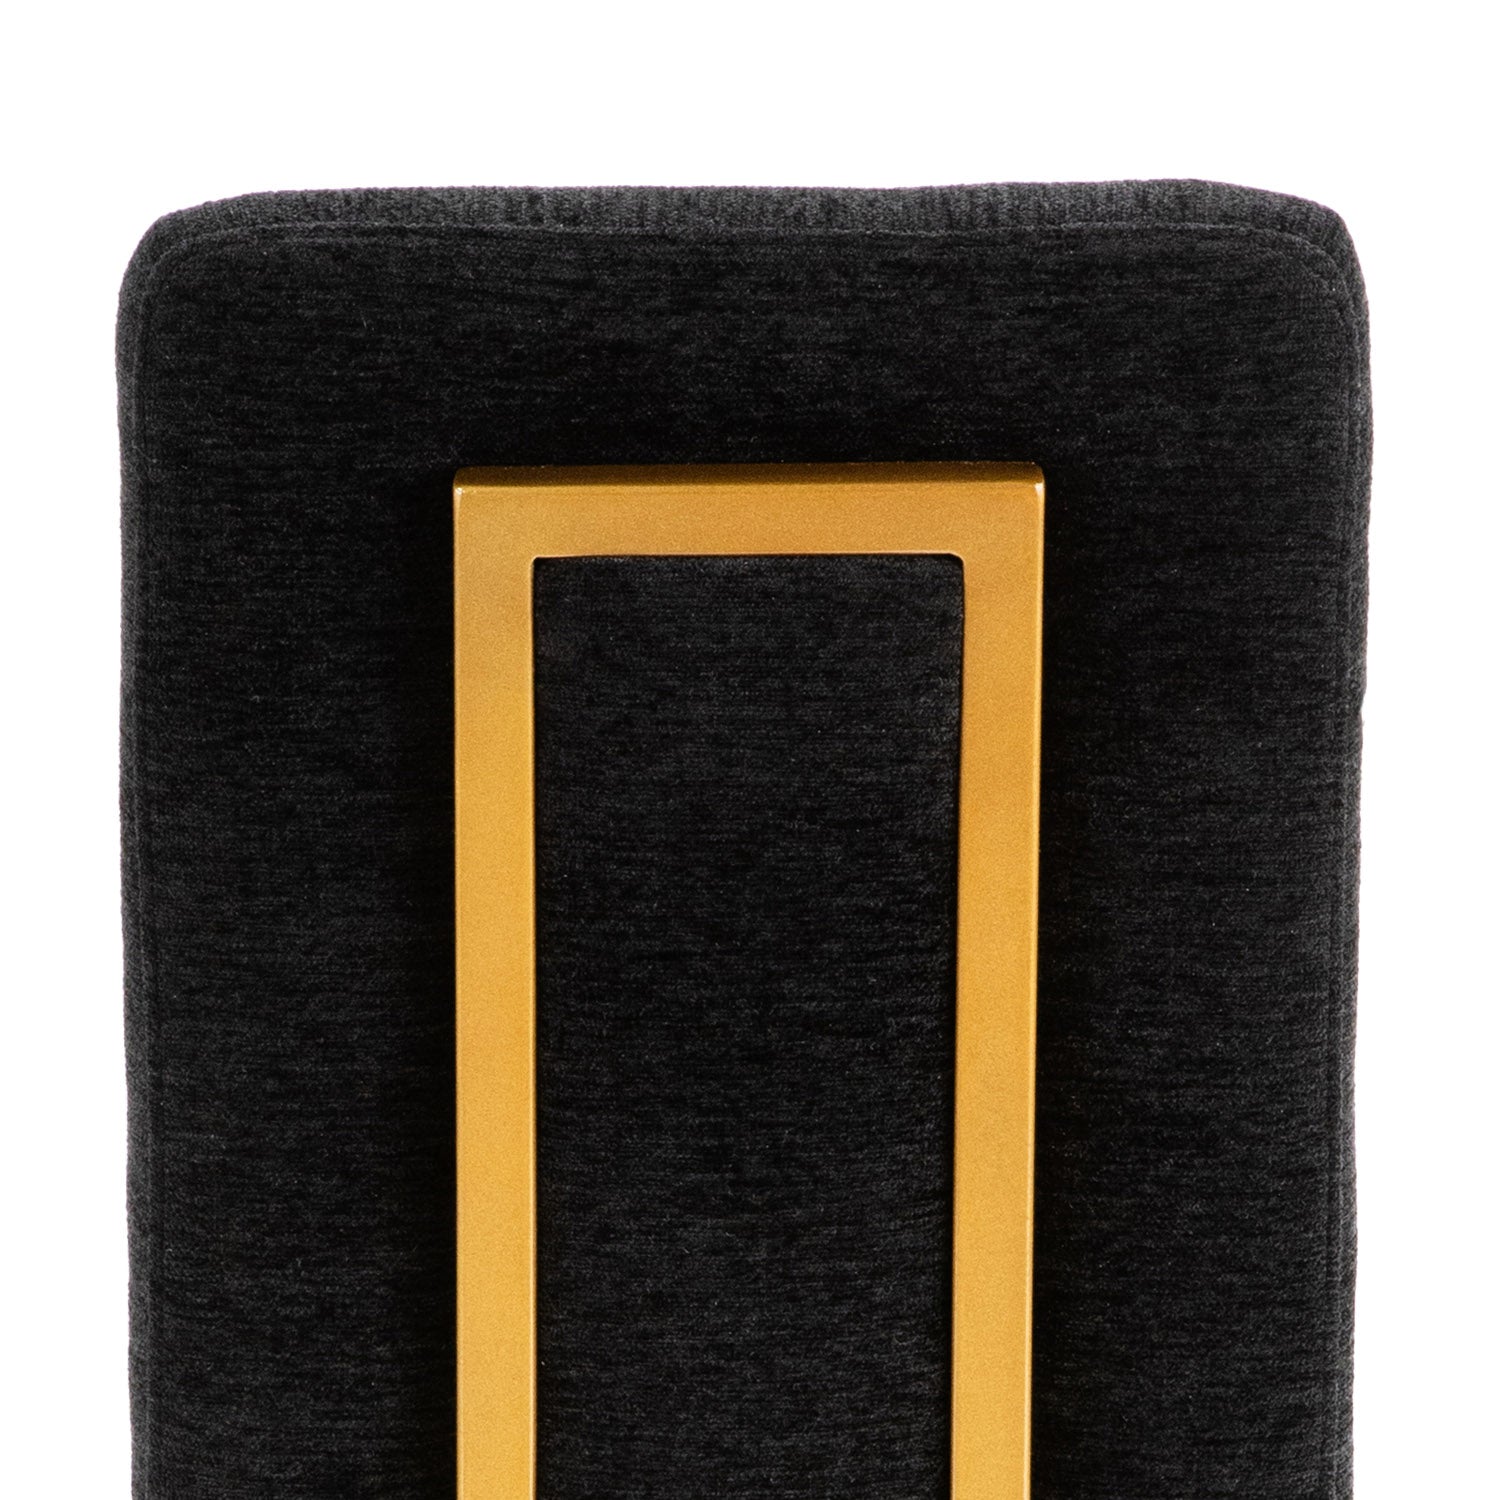 Wesley Allen Brentwood Chair in Mid Black Fabric and Sheen Gold Finish. Close View.